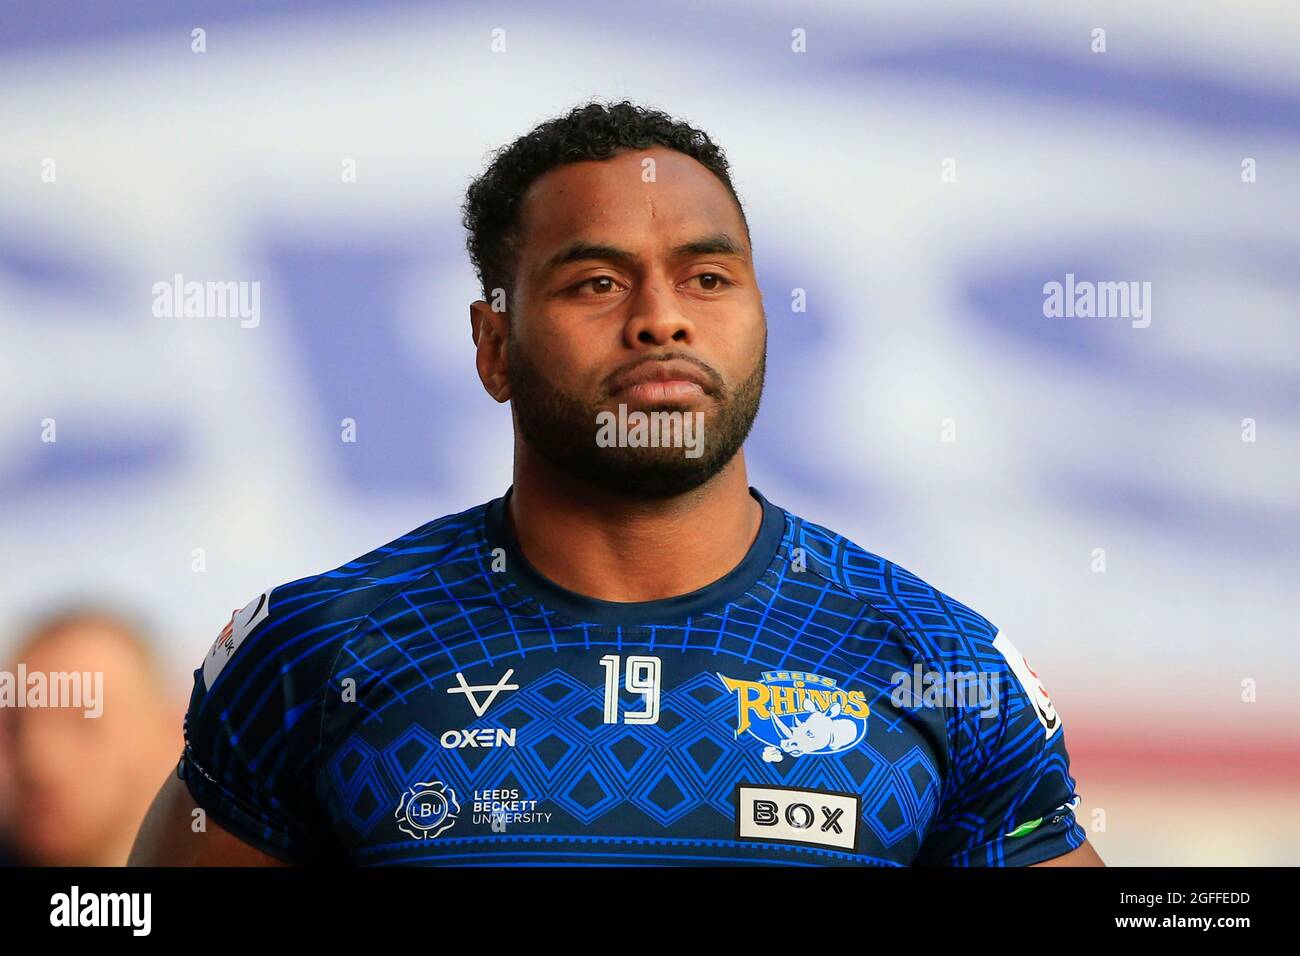 Wigan, UK. 25th Aug, 2021. King Vuniyayawa (19) of Leeds Rhinos during the warm up for the game in Wigan, United Kingdom on 8/25/2021. (Photo by Conor Molloy/News Images/Sipa USA) Credit: Sipa USA/Alamy Live News Stock Photo